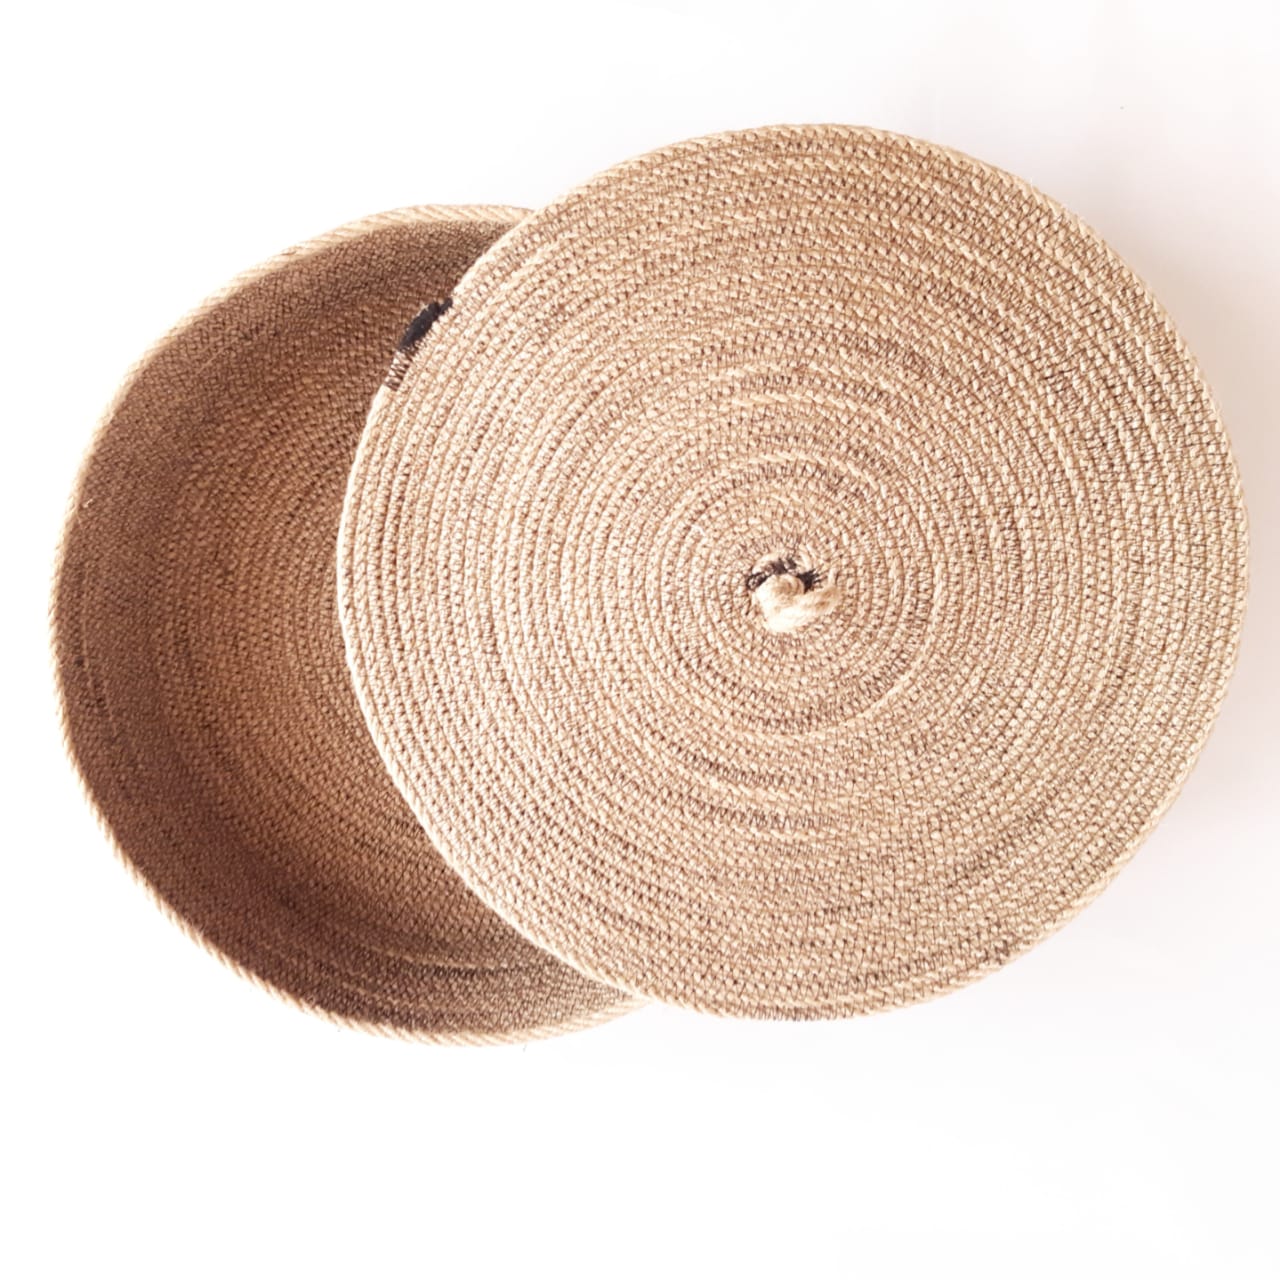 Woven Jute tray With Lid